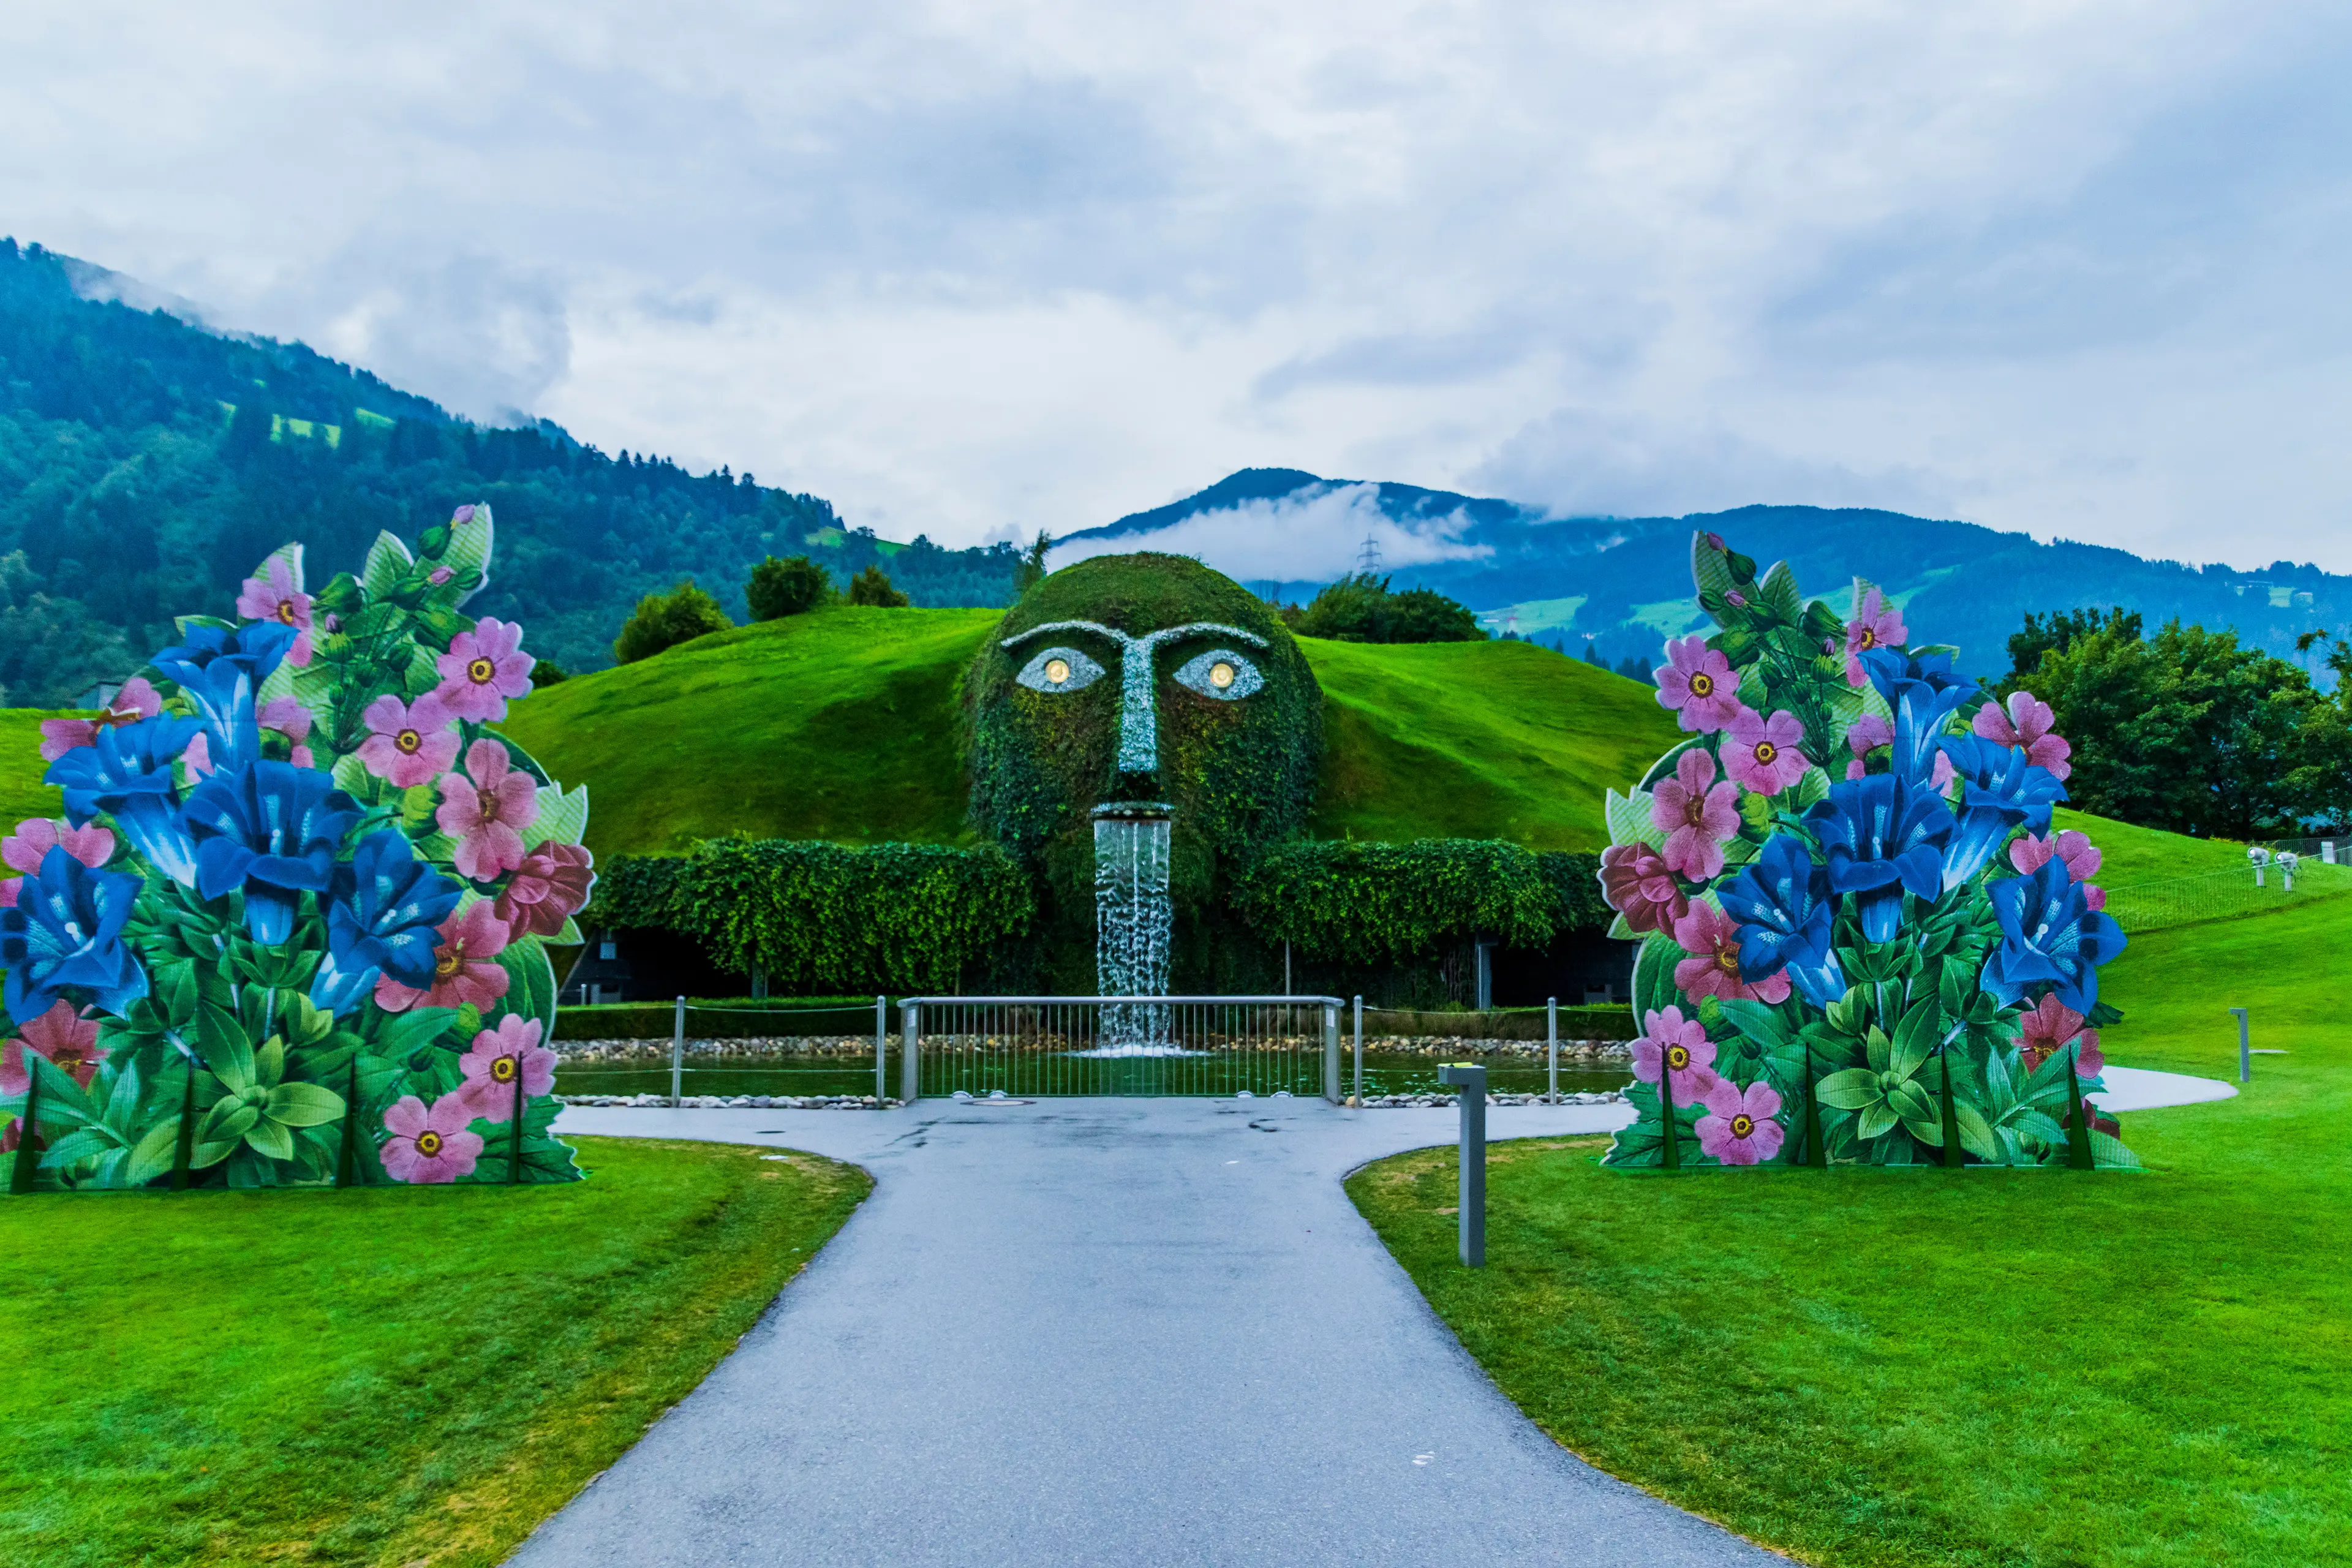 2-Day Solo Sightseeing & Culinary Journey in Innsbruck, Austria